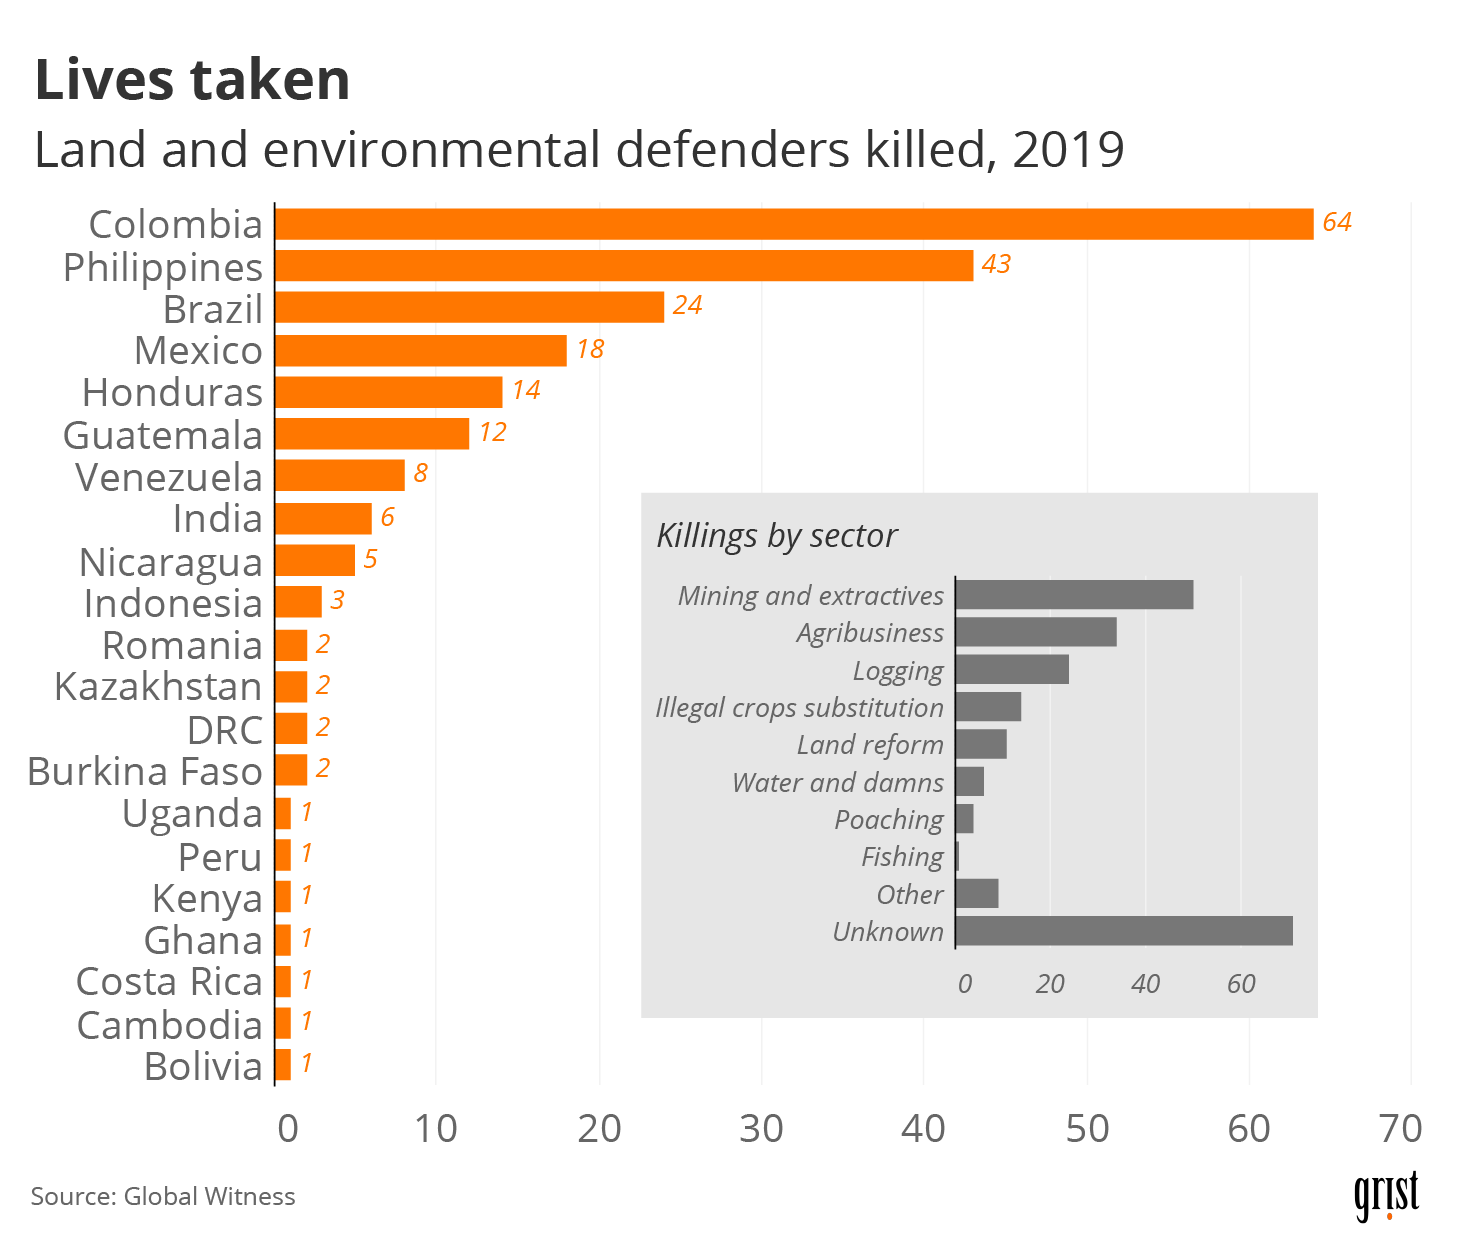 A bar chart showing the count of land and environmental defenders killed in 2019. Colombia saw the greatest number killed, at 64. An inset bar chart breaks down the killings by sector. Mining and extractives accounts for the largest known sector.